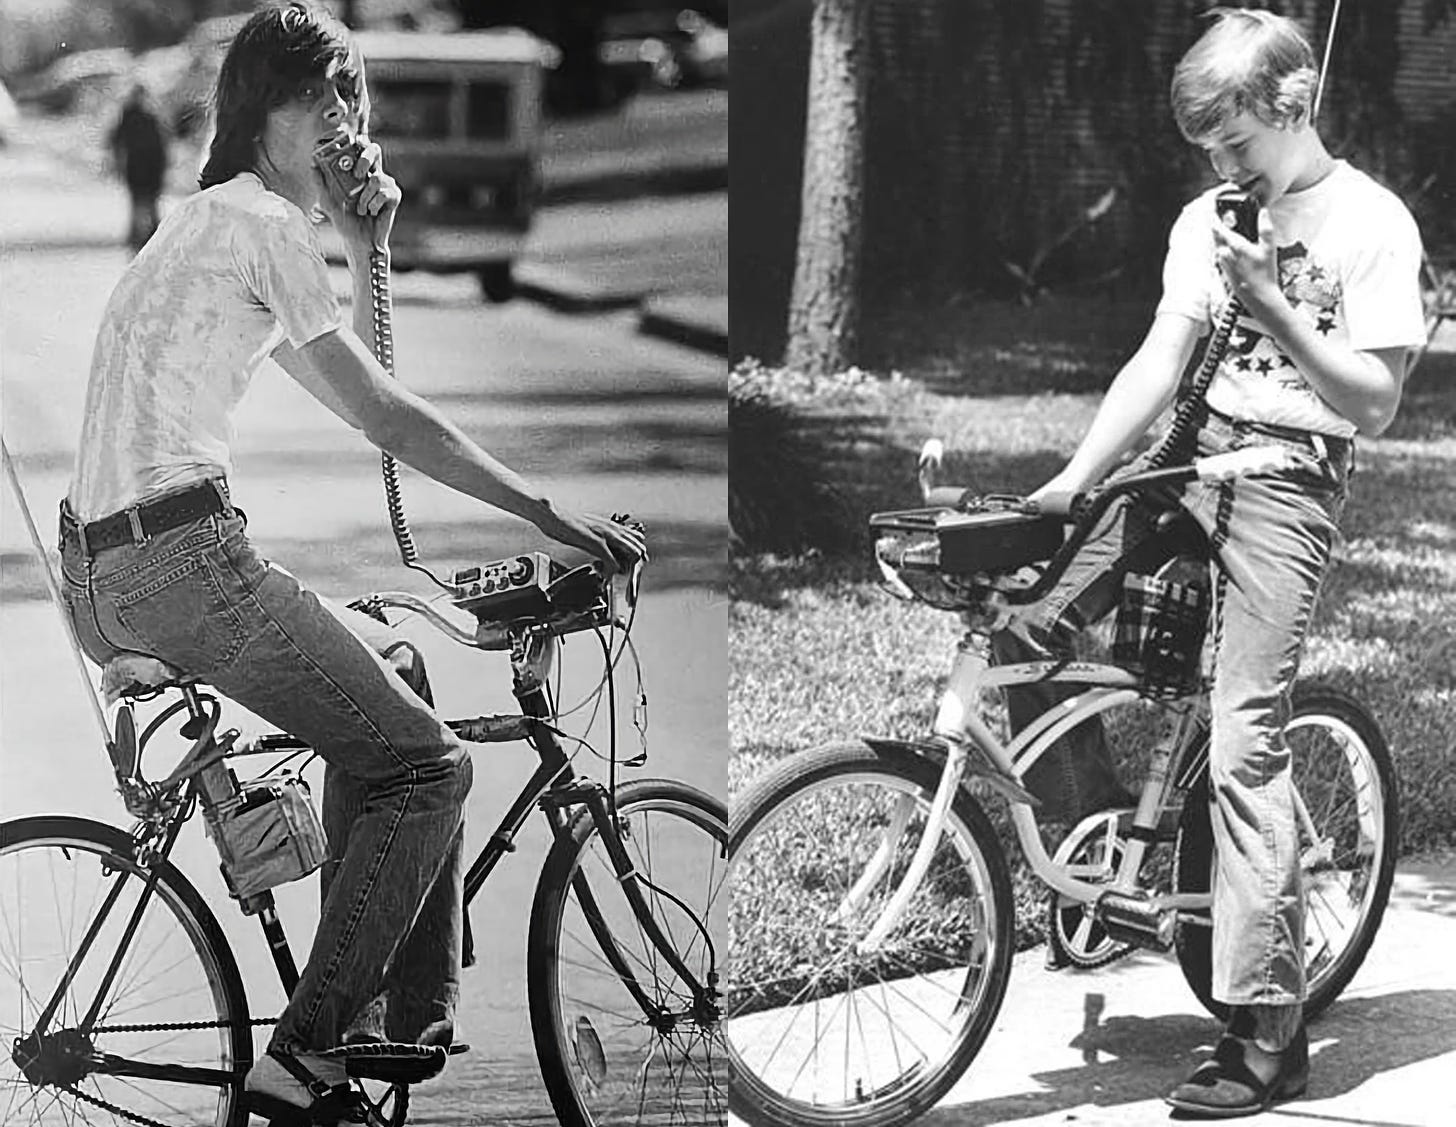 Two black and white images showing young people on bikes using CB radios.